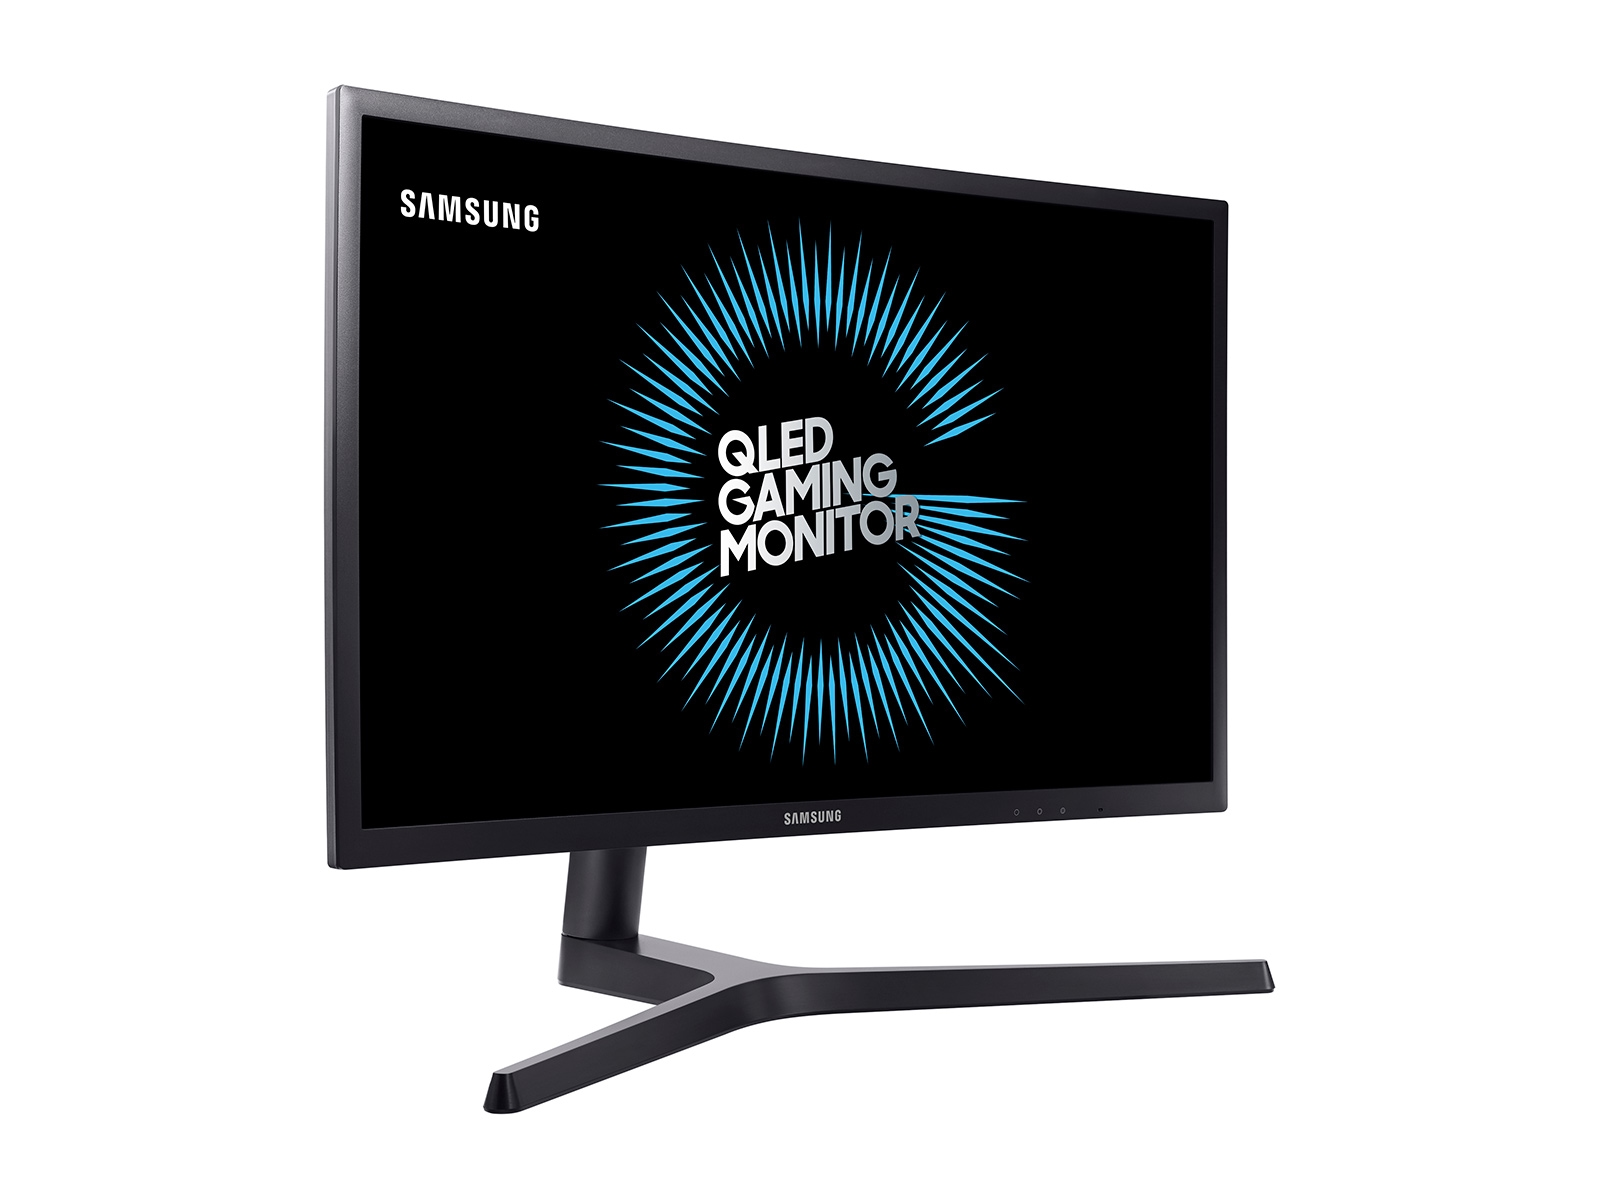 24” CFG73 Gaming Monitor with Quantum Dot